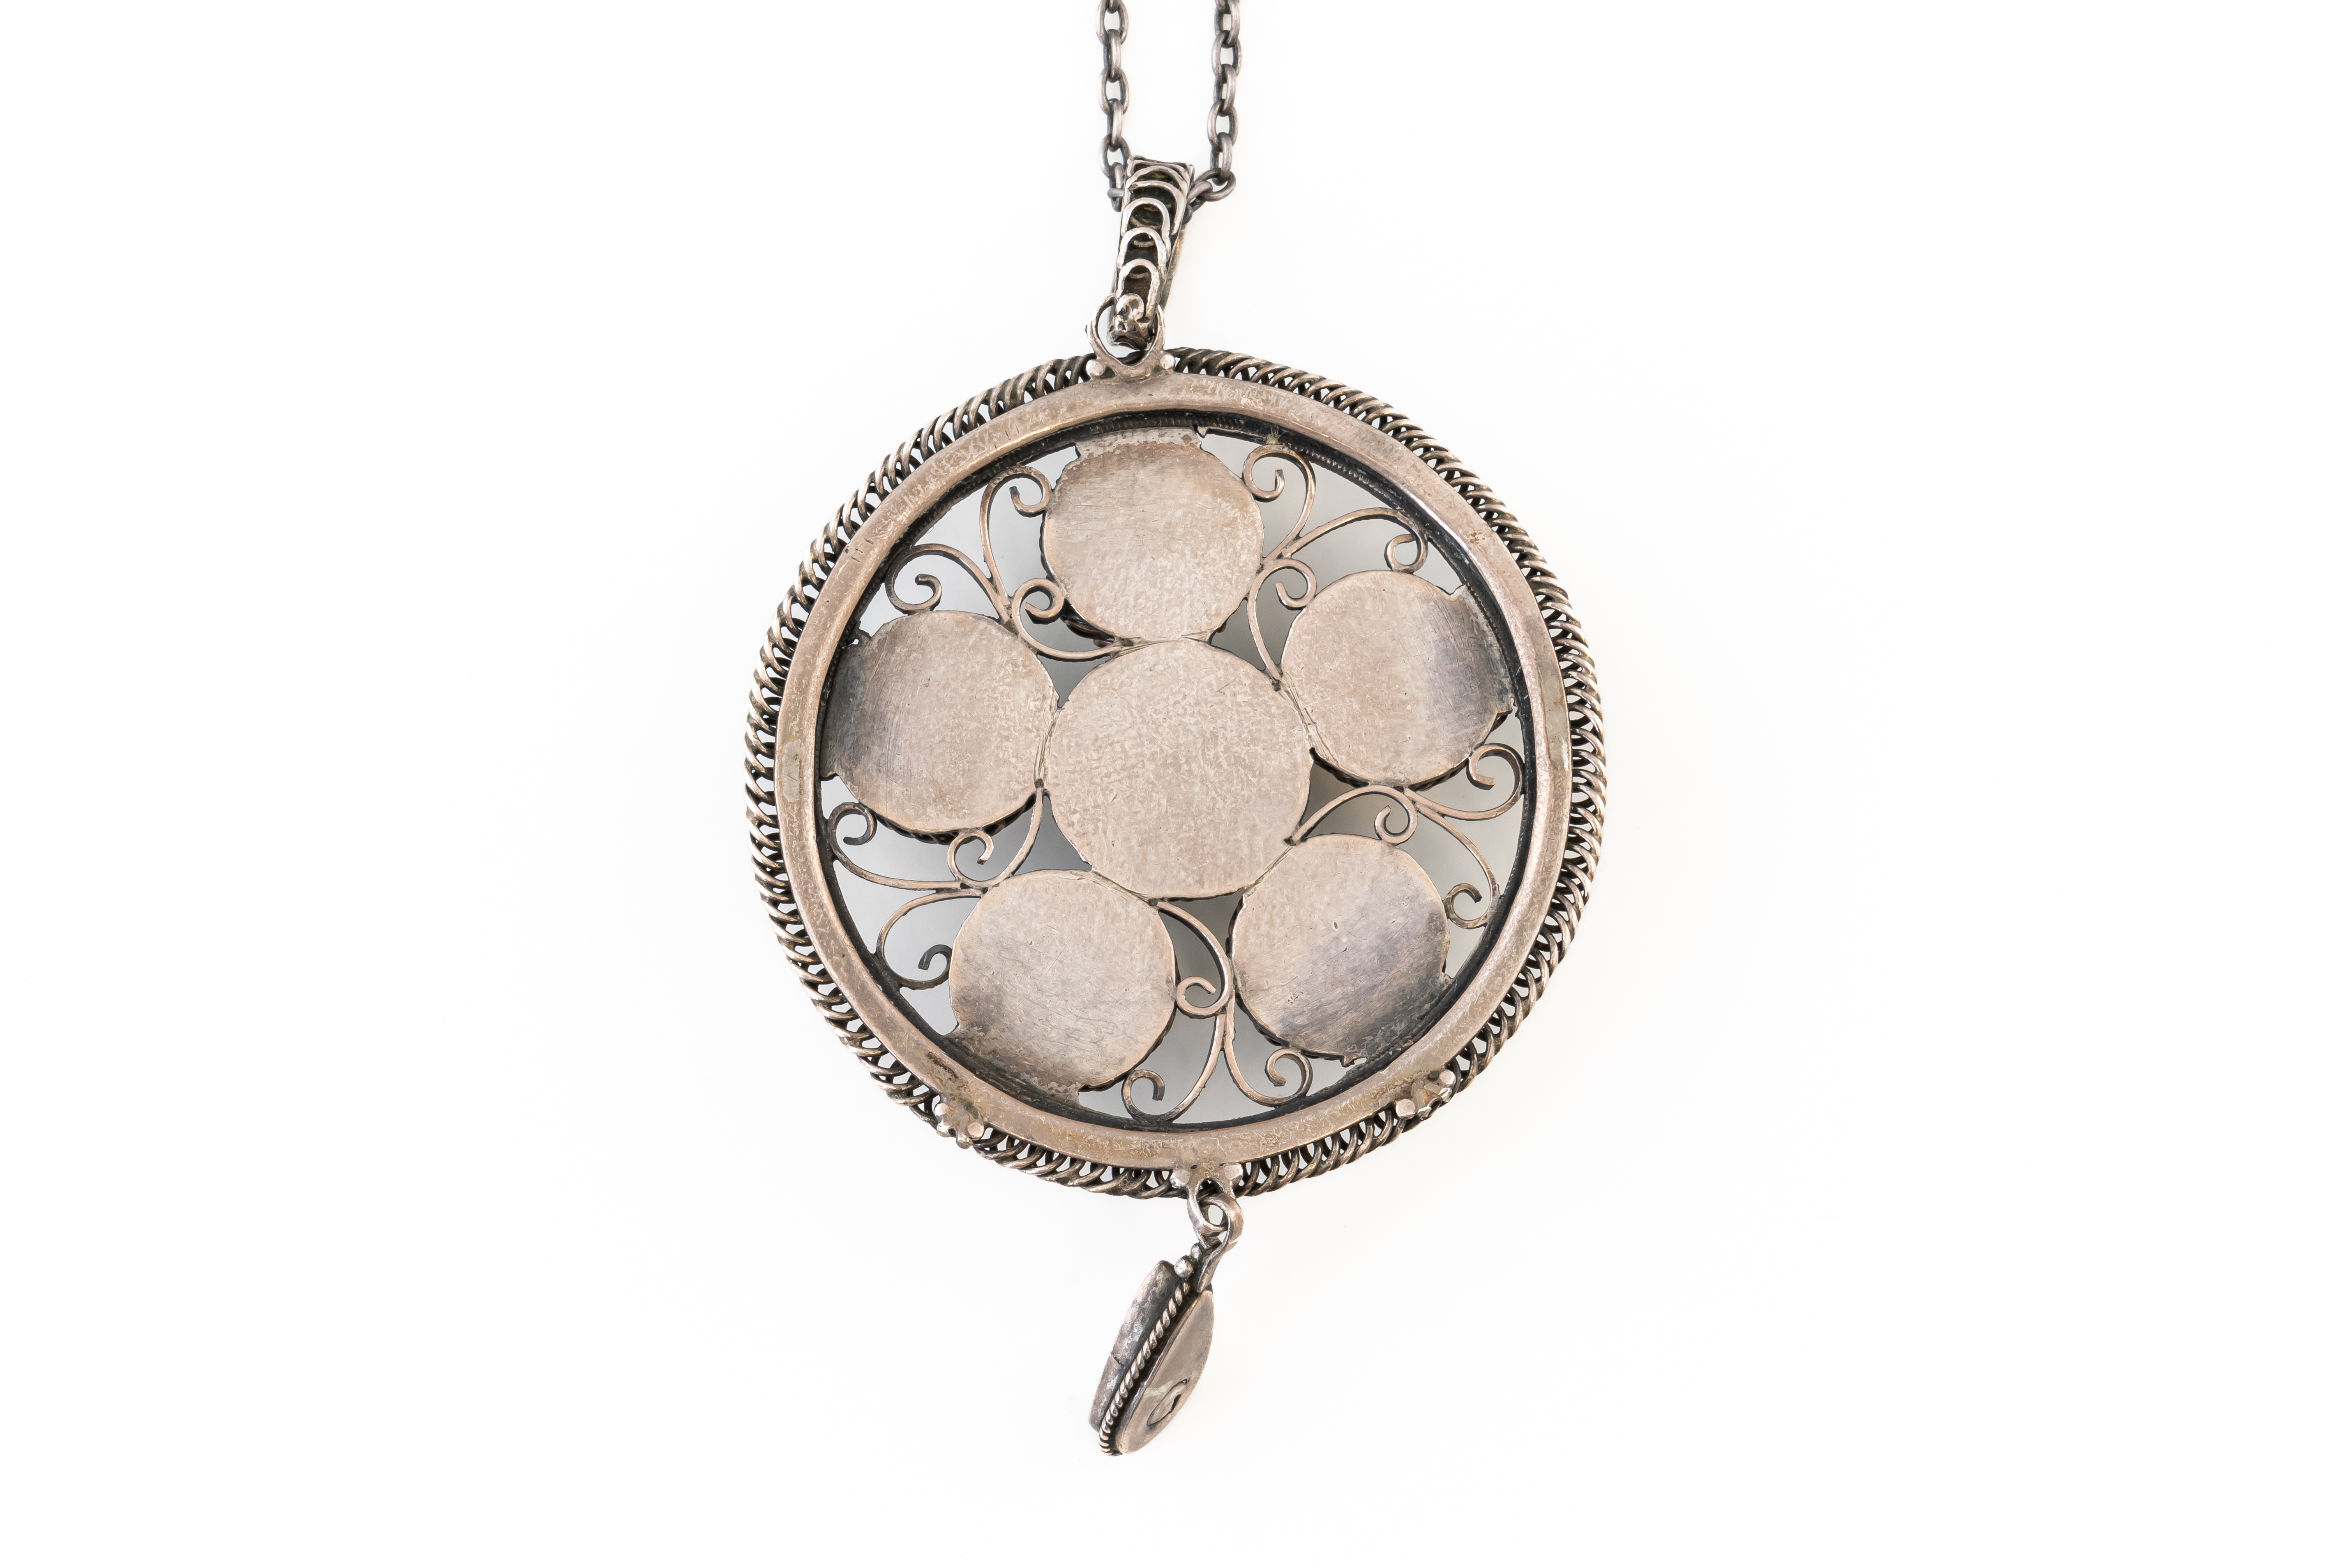 ARTHUR AND GEORGIE GASKIN - A MOONSTONE AND PEARL NECKLACE - Image 2 of 2